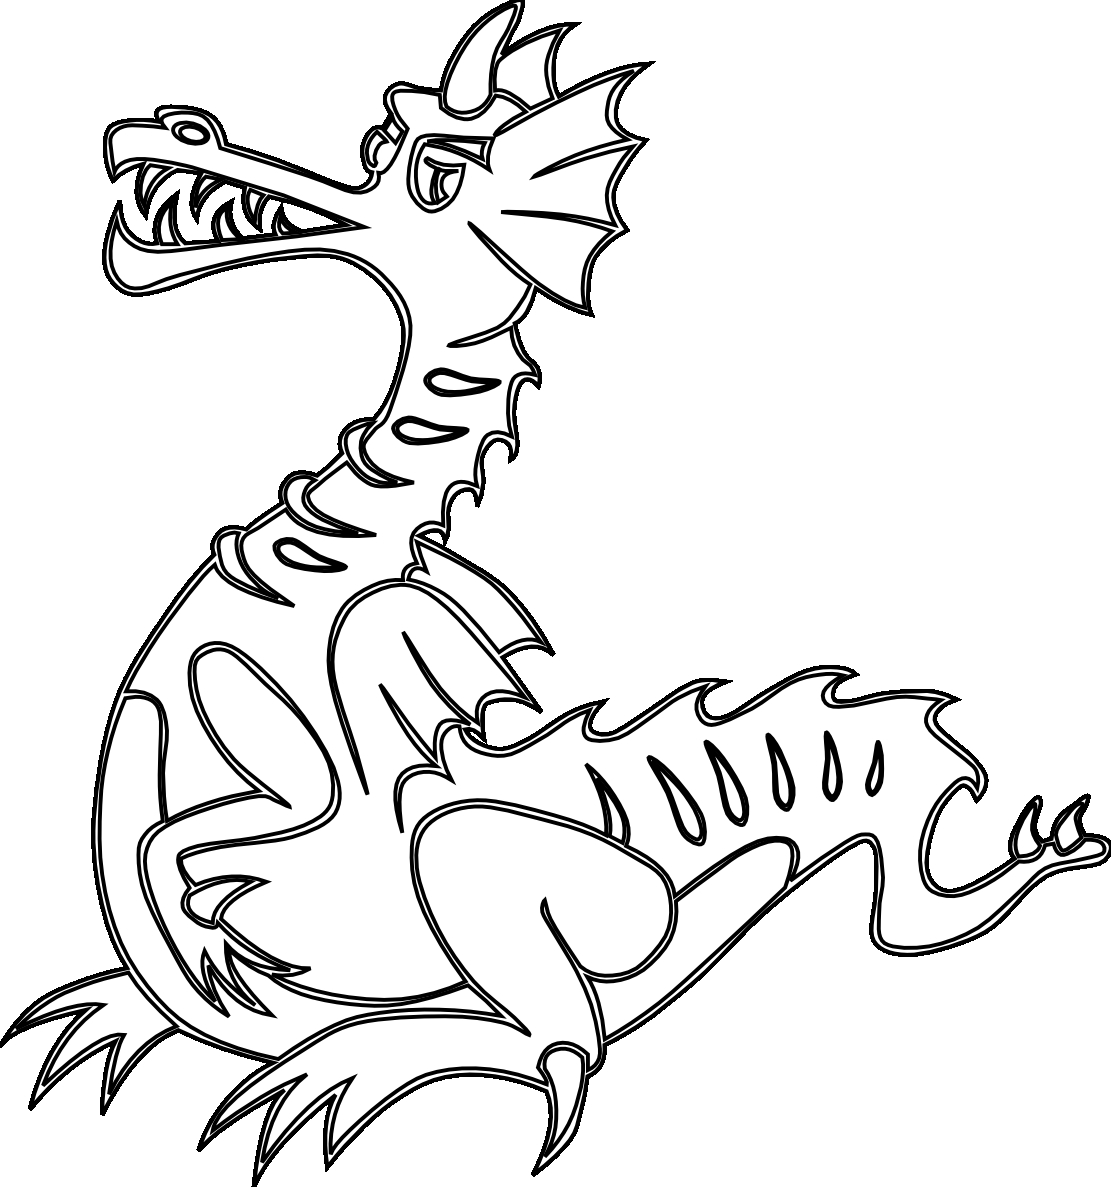 Fresh dragon gallery digital. China clipart black and white